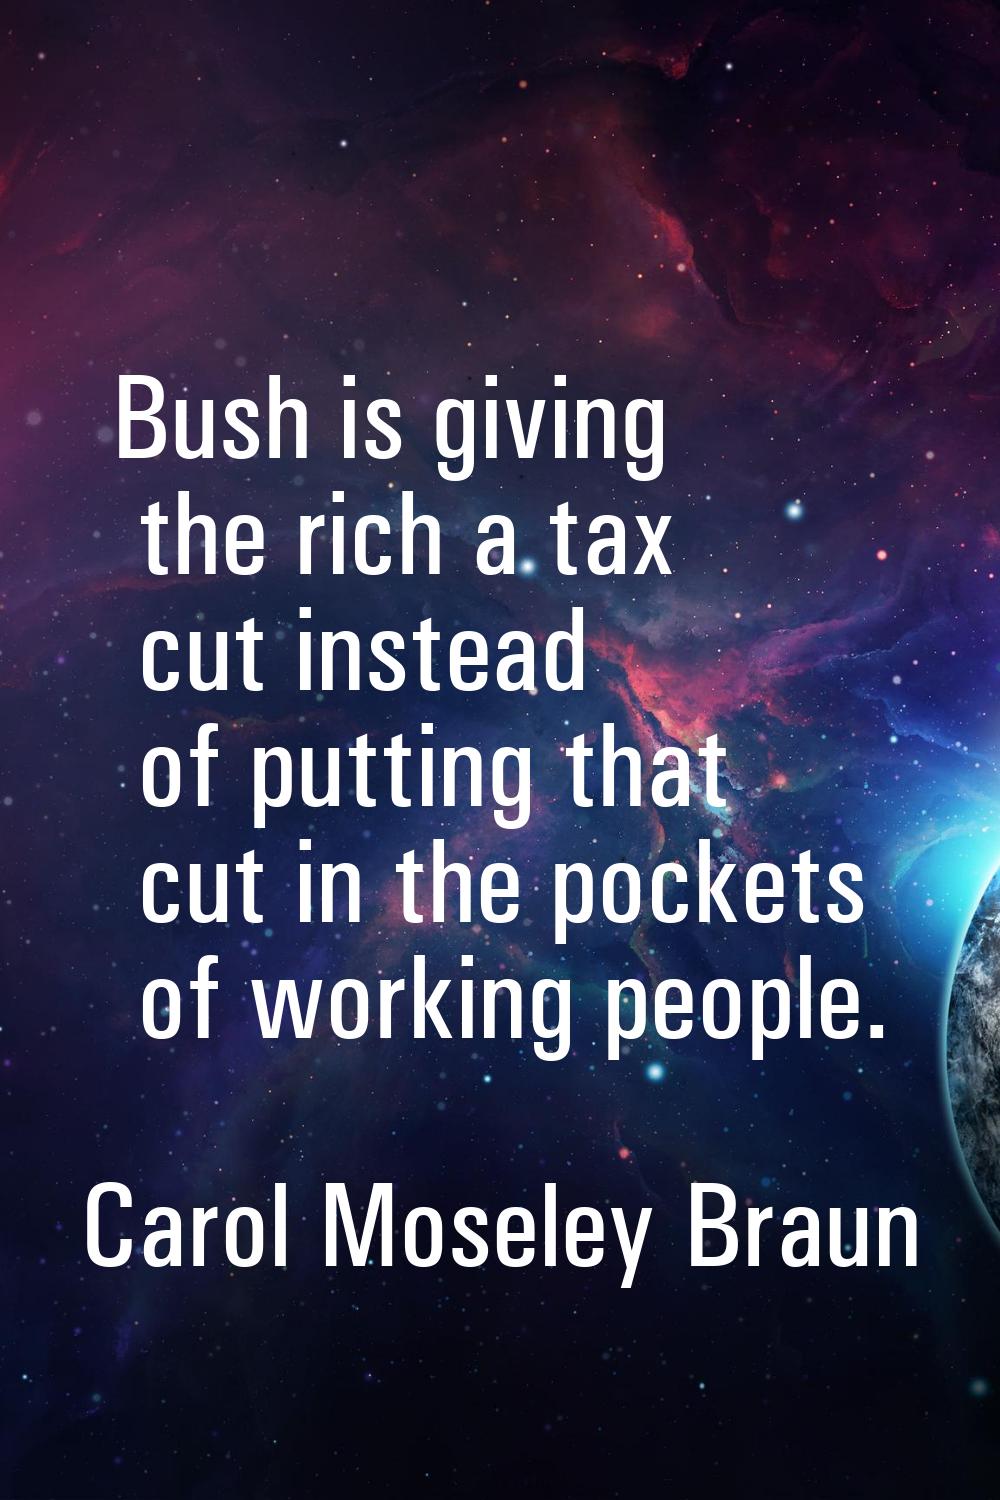 Bush is giving the rich a tax cut instead of putting that cut in the pockets of working people.